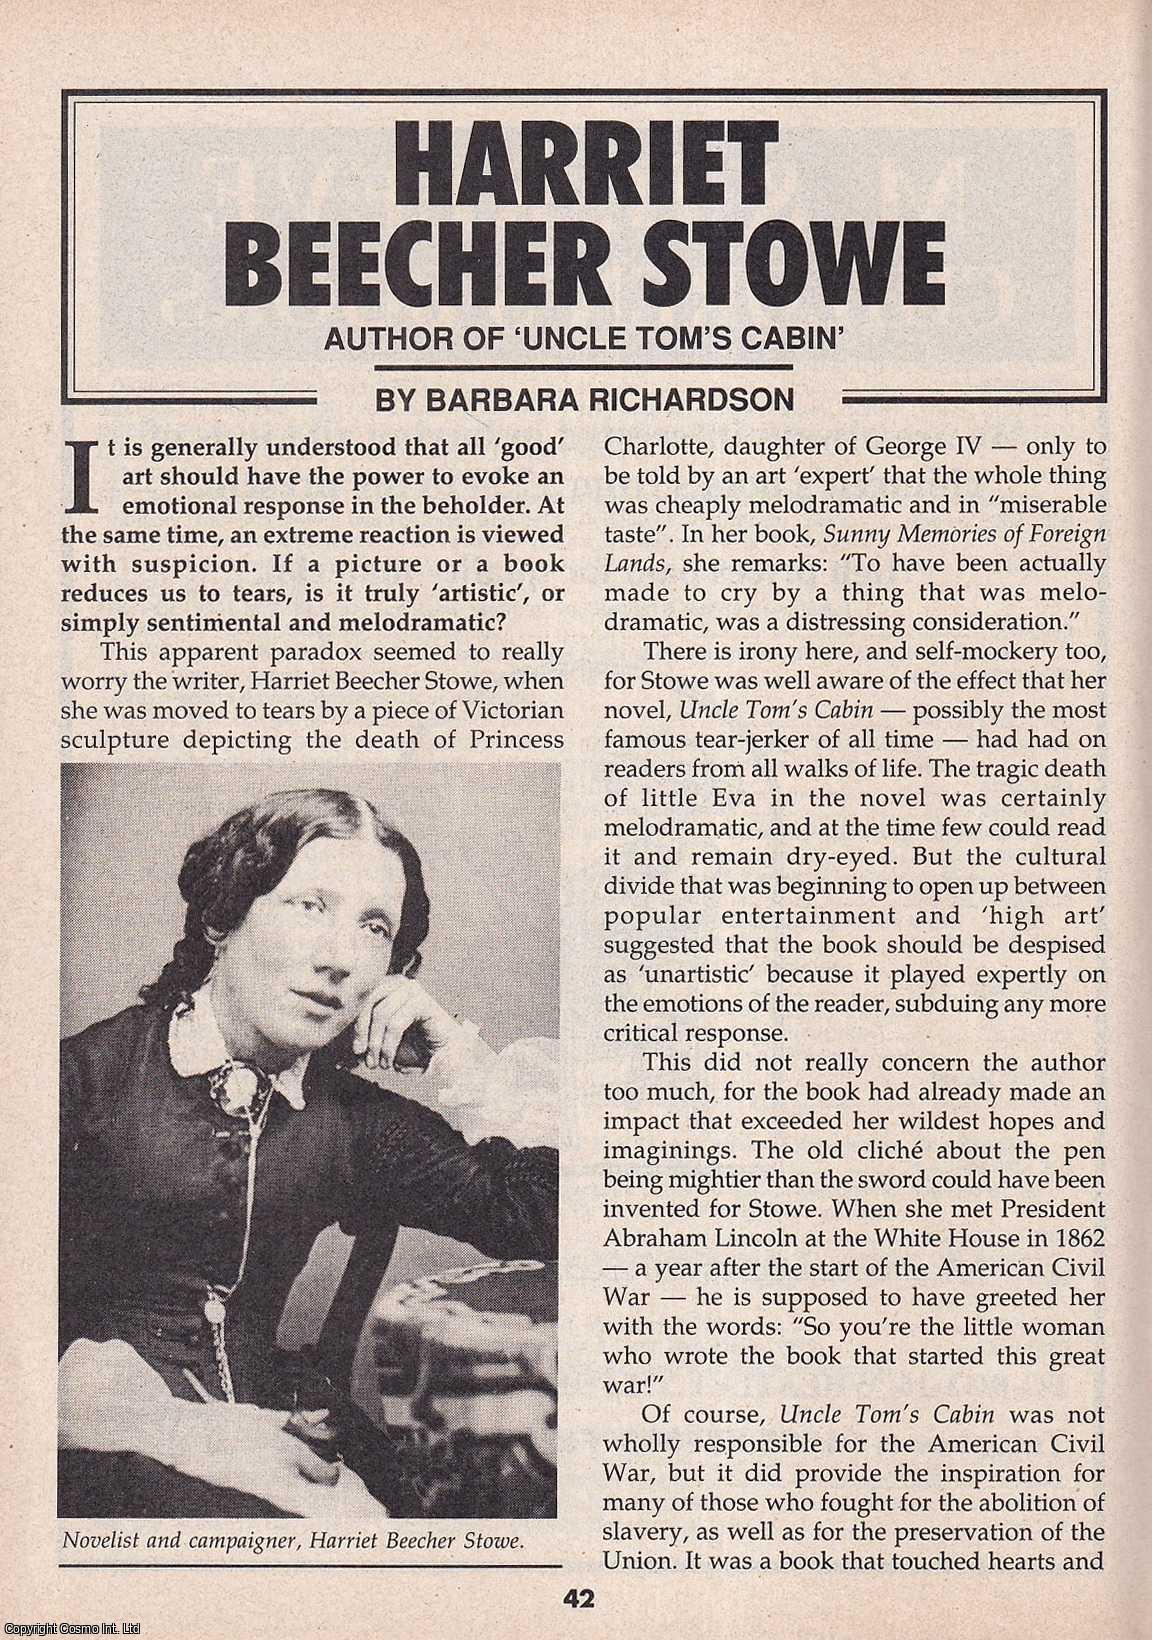 Barbara Richardson - Harriet Beecher Stowe. Author of Uncle Tom's Cabin. This is an original article separated from an issue of The Book & Magazine Collector publication.